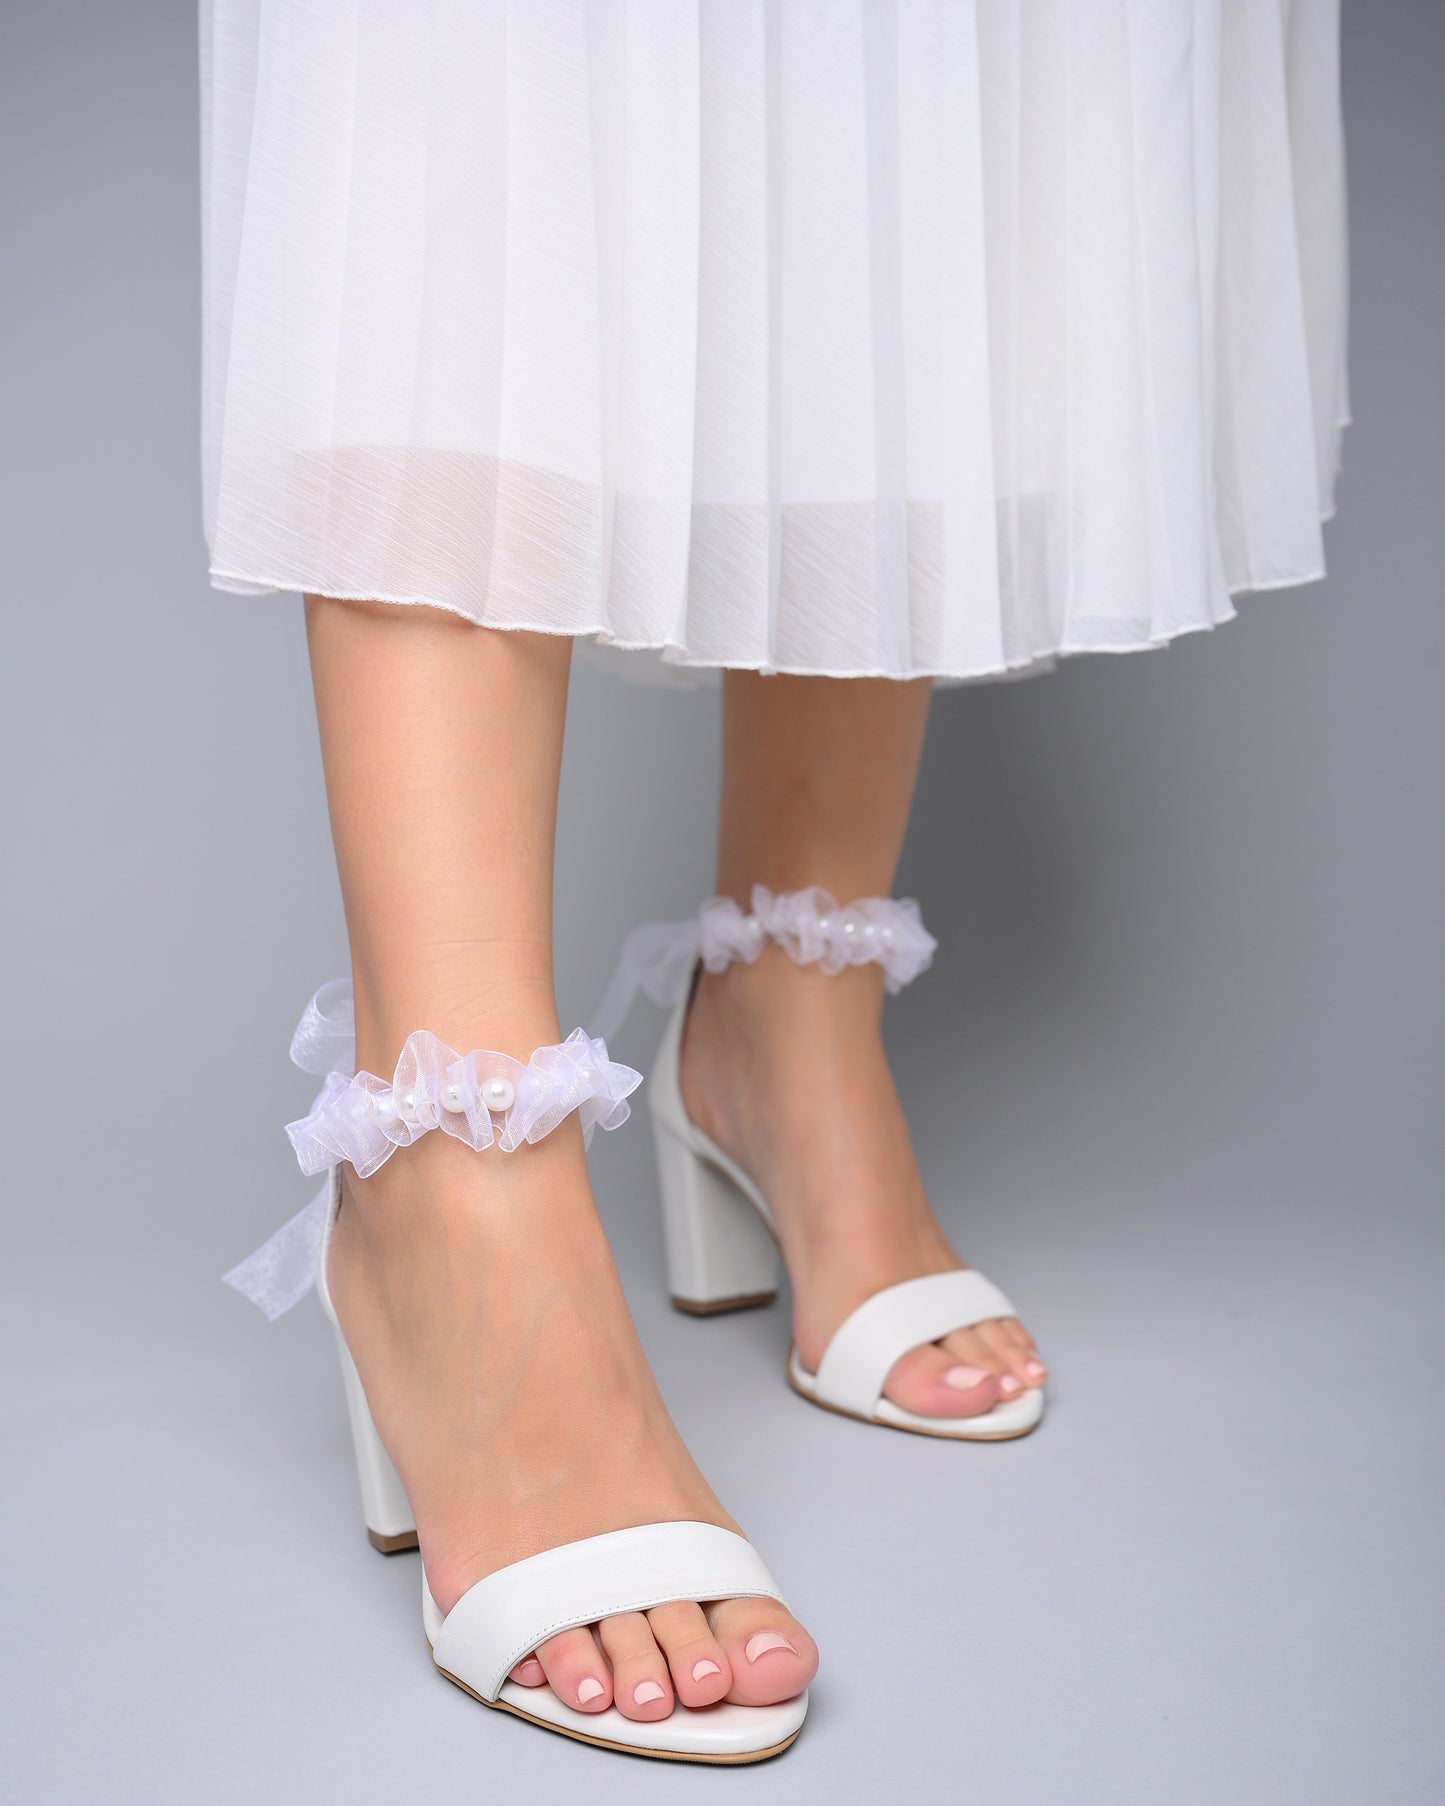 wedding shoes for bride, size 12 women shoes